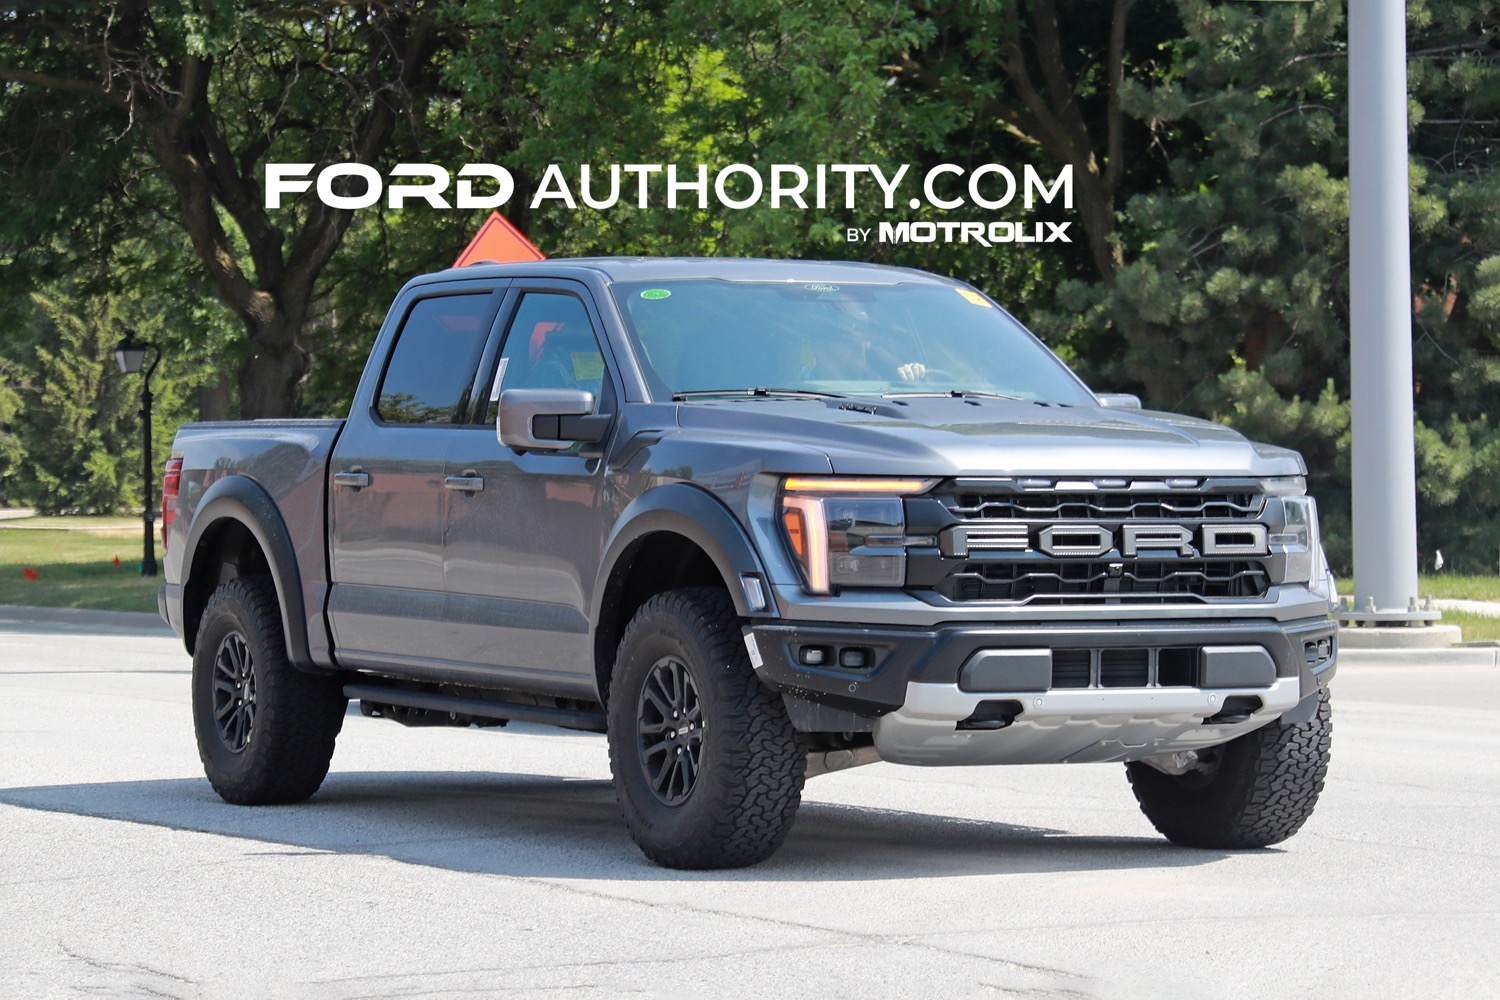 https://fordauthority.com/wp-content/uploads/2023/06/2024-Ford-F-150-Raptor-Refresh-Prototype-Spy-Shots-No-Camouflage-June-2023-Exterior-001.jpg